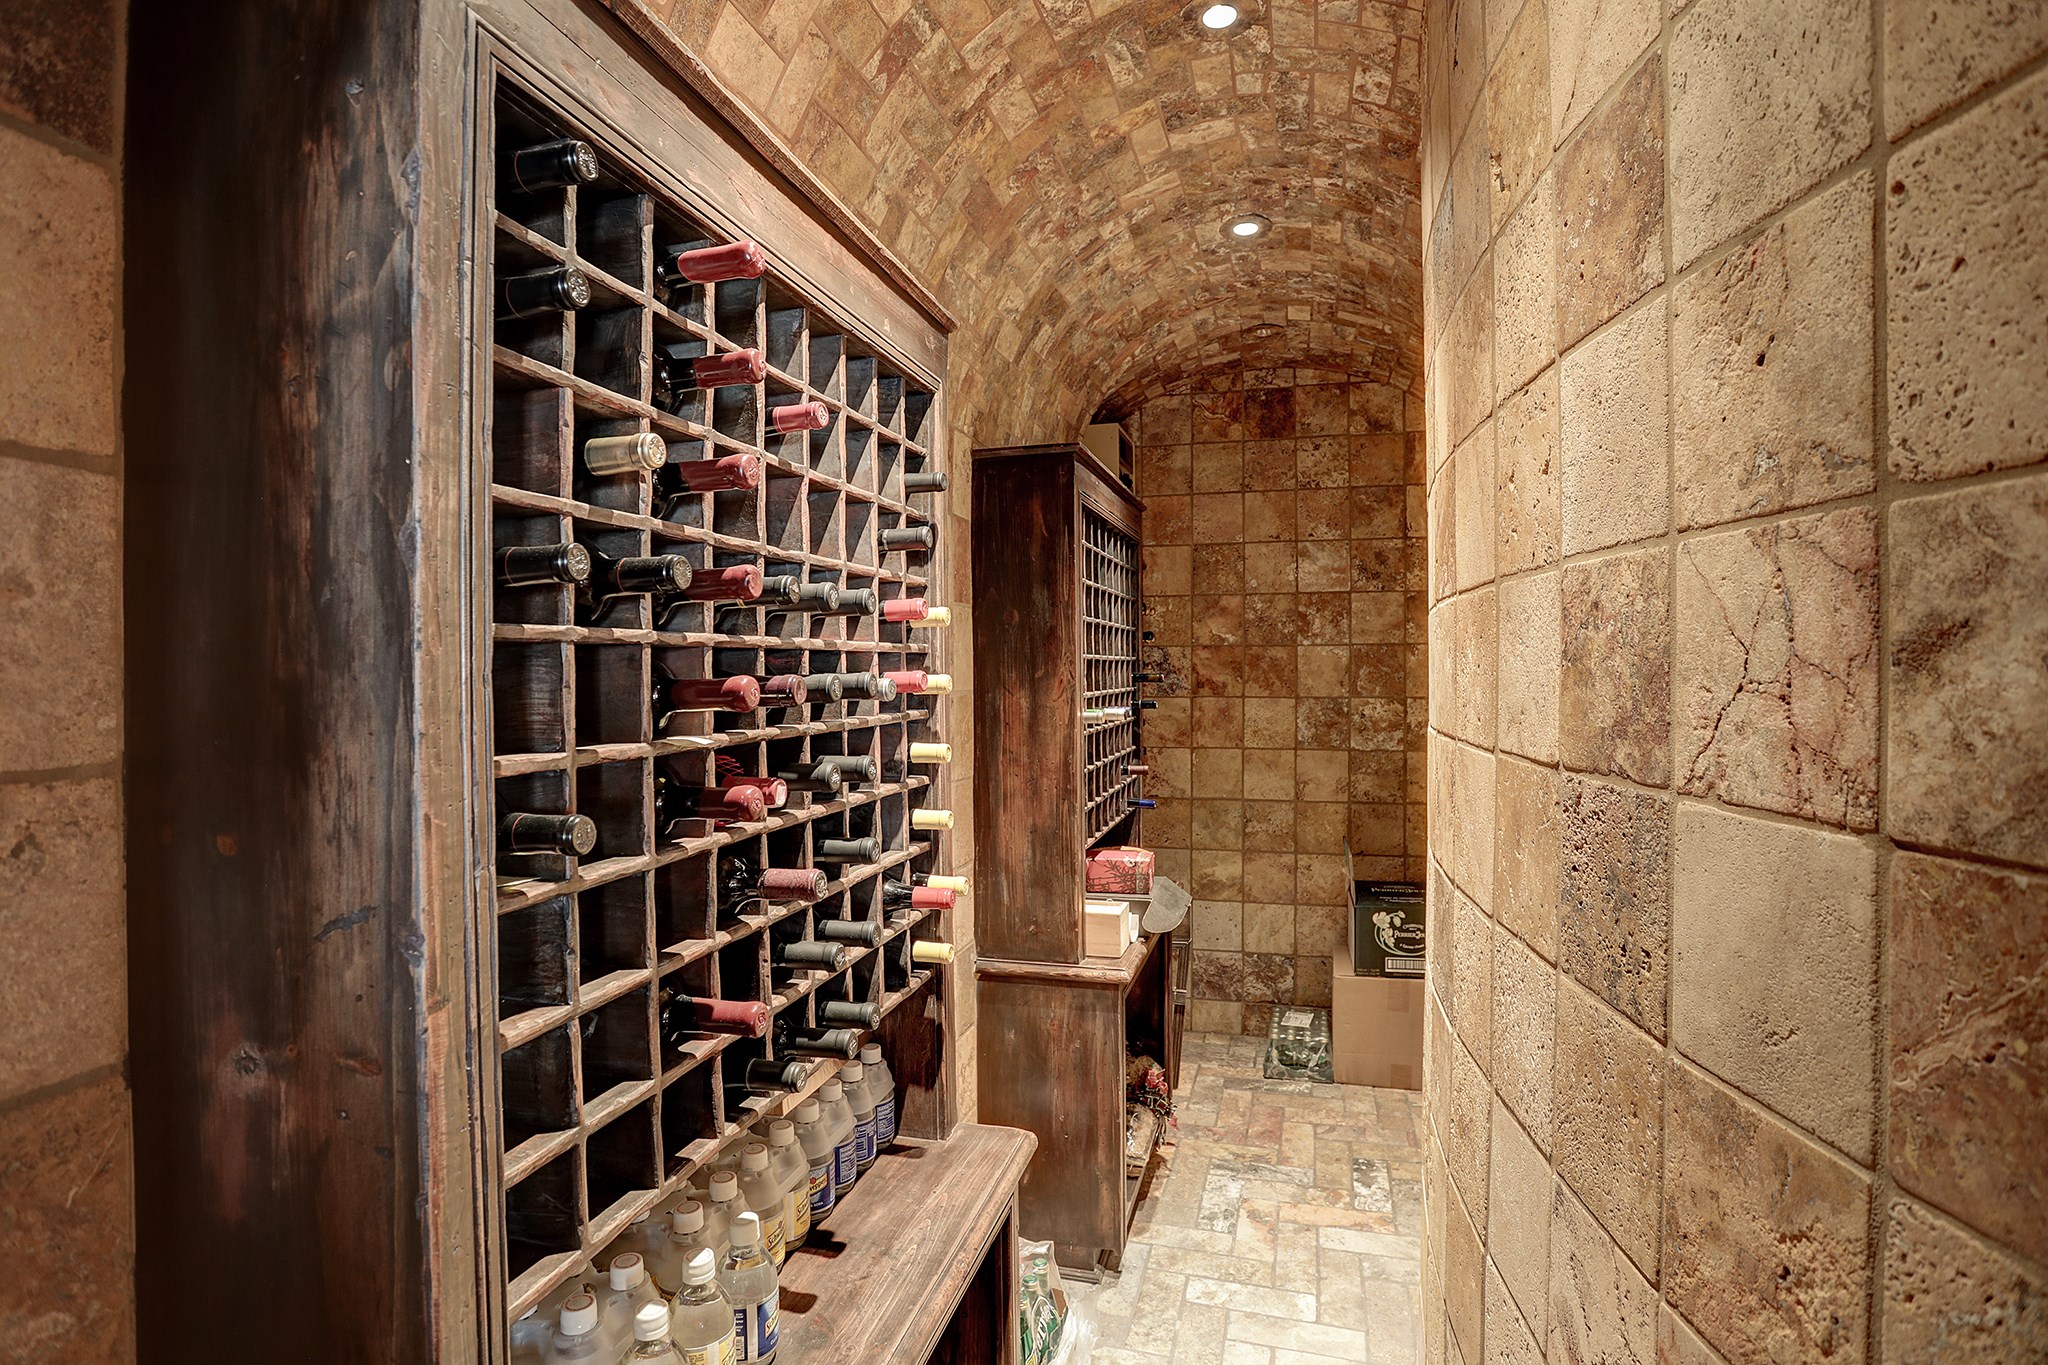 The Wine Vault is temperature controlled with honed travertine tile floor, walls and barrel ceiling.  At present there is a minimum of 200 bottle capacity (more could be added to the built-in cabinets).